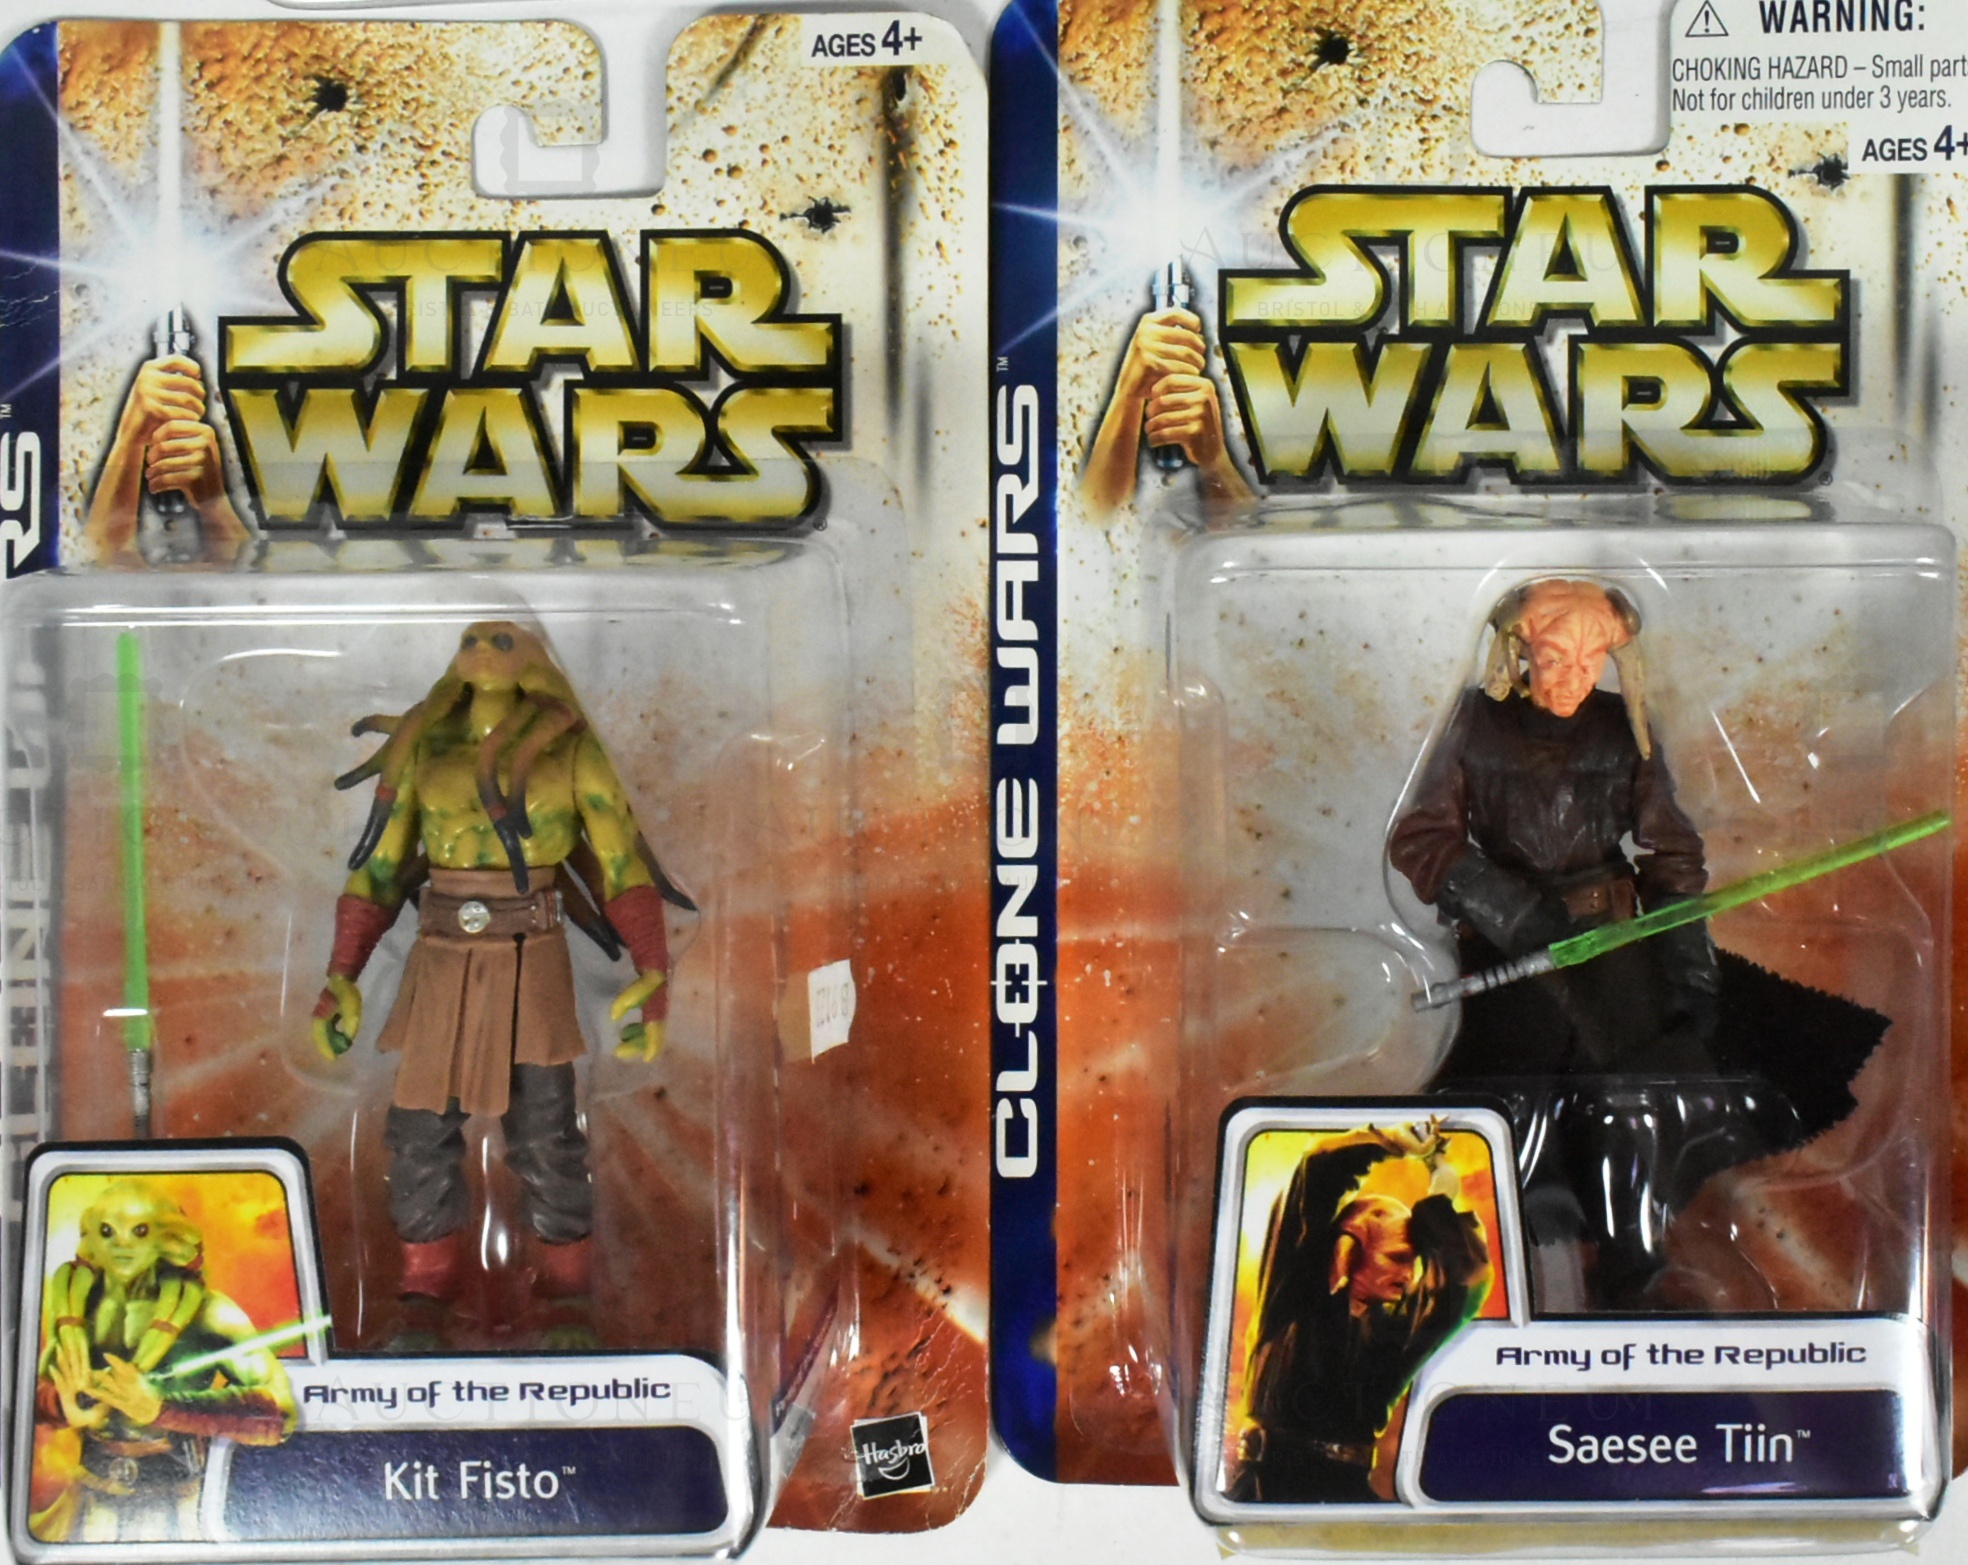 STAR WARS - CLONE WARS - CARDED ACTION FIGURES - Image 5 of 5